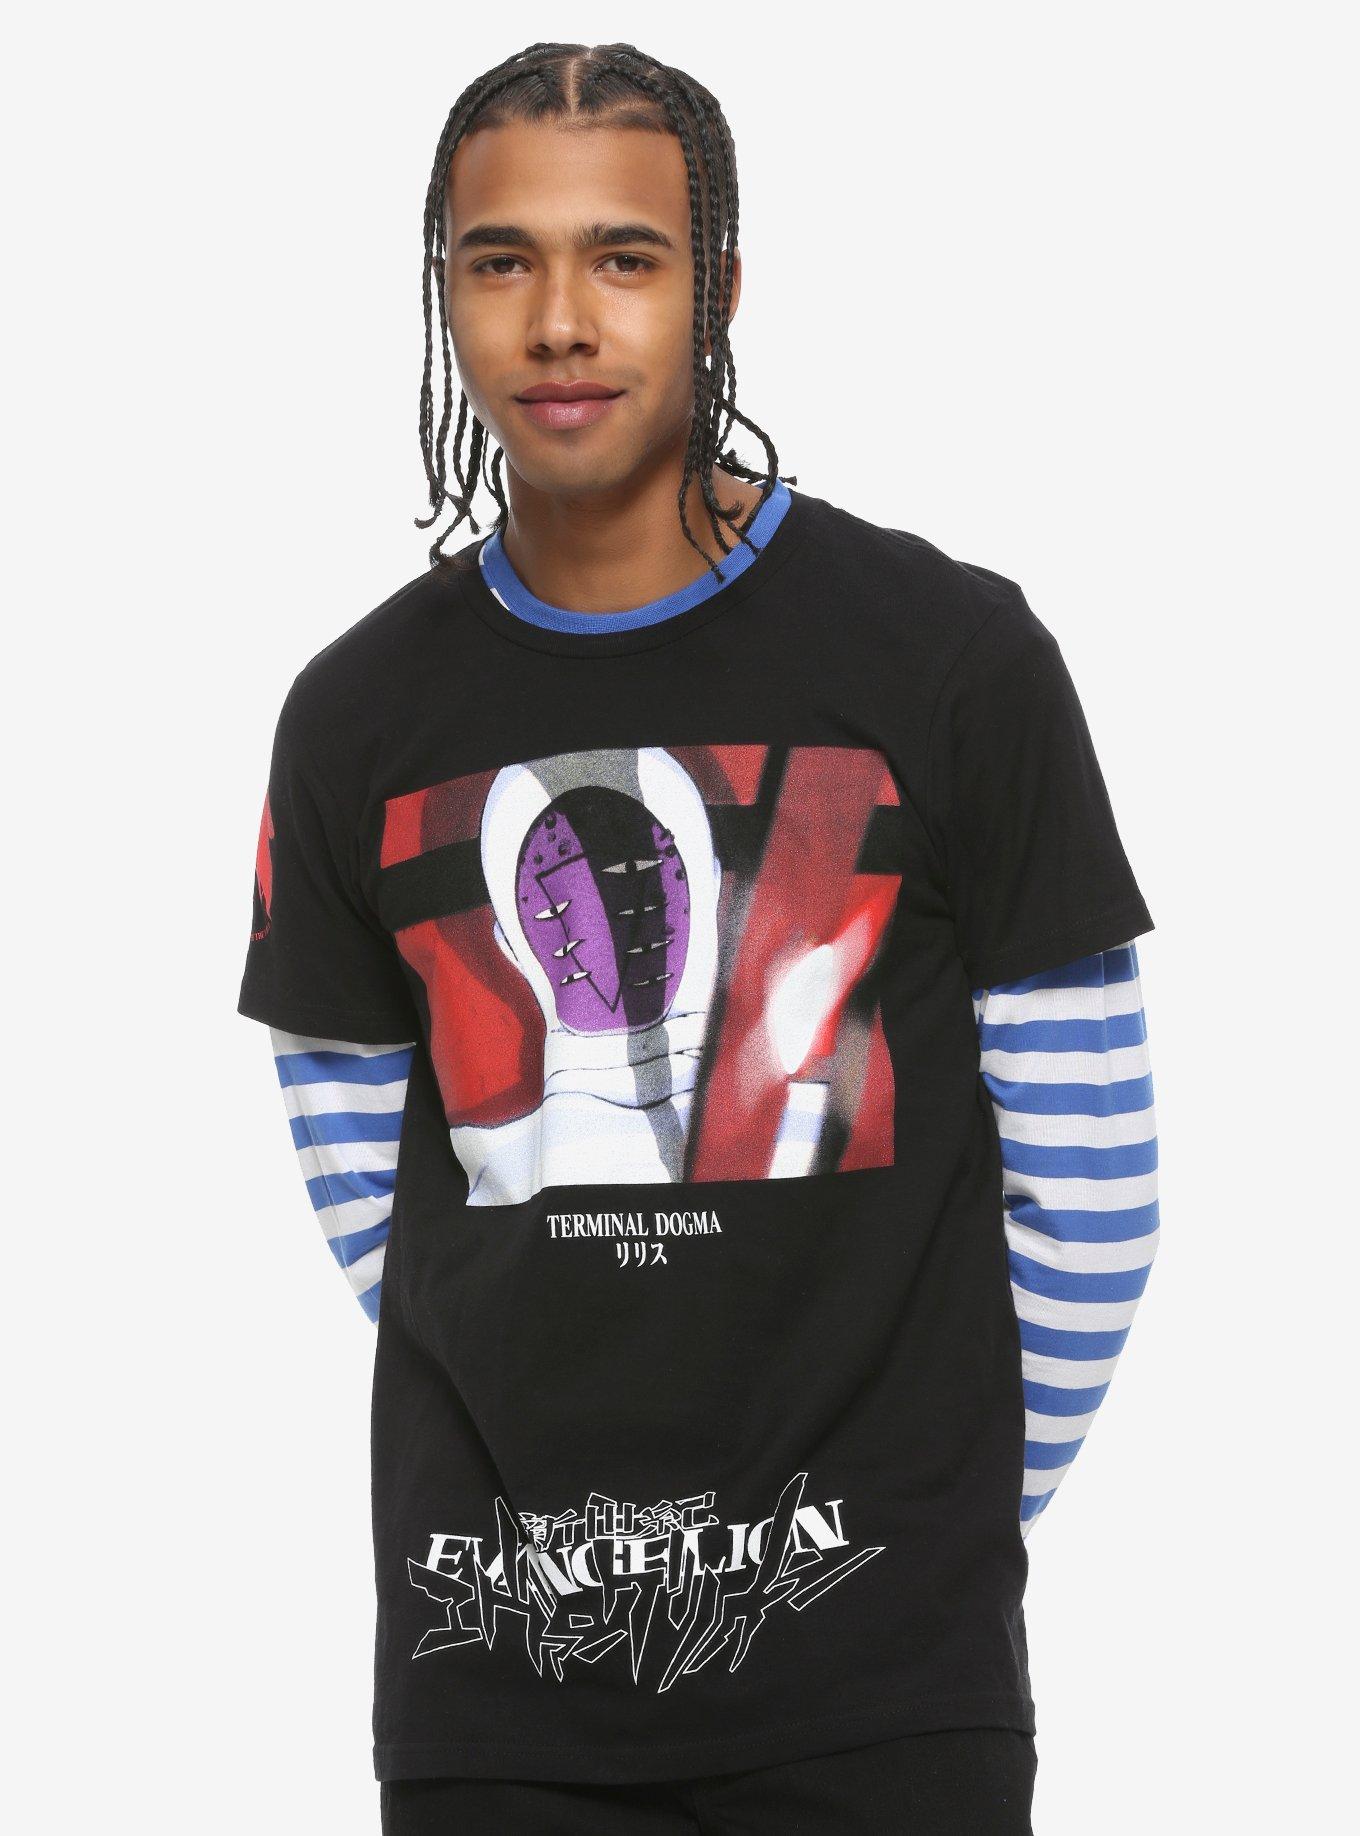 Blue & White Striped Long-Sleeve T-Shirt | Hot Topic